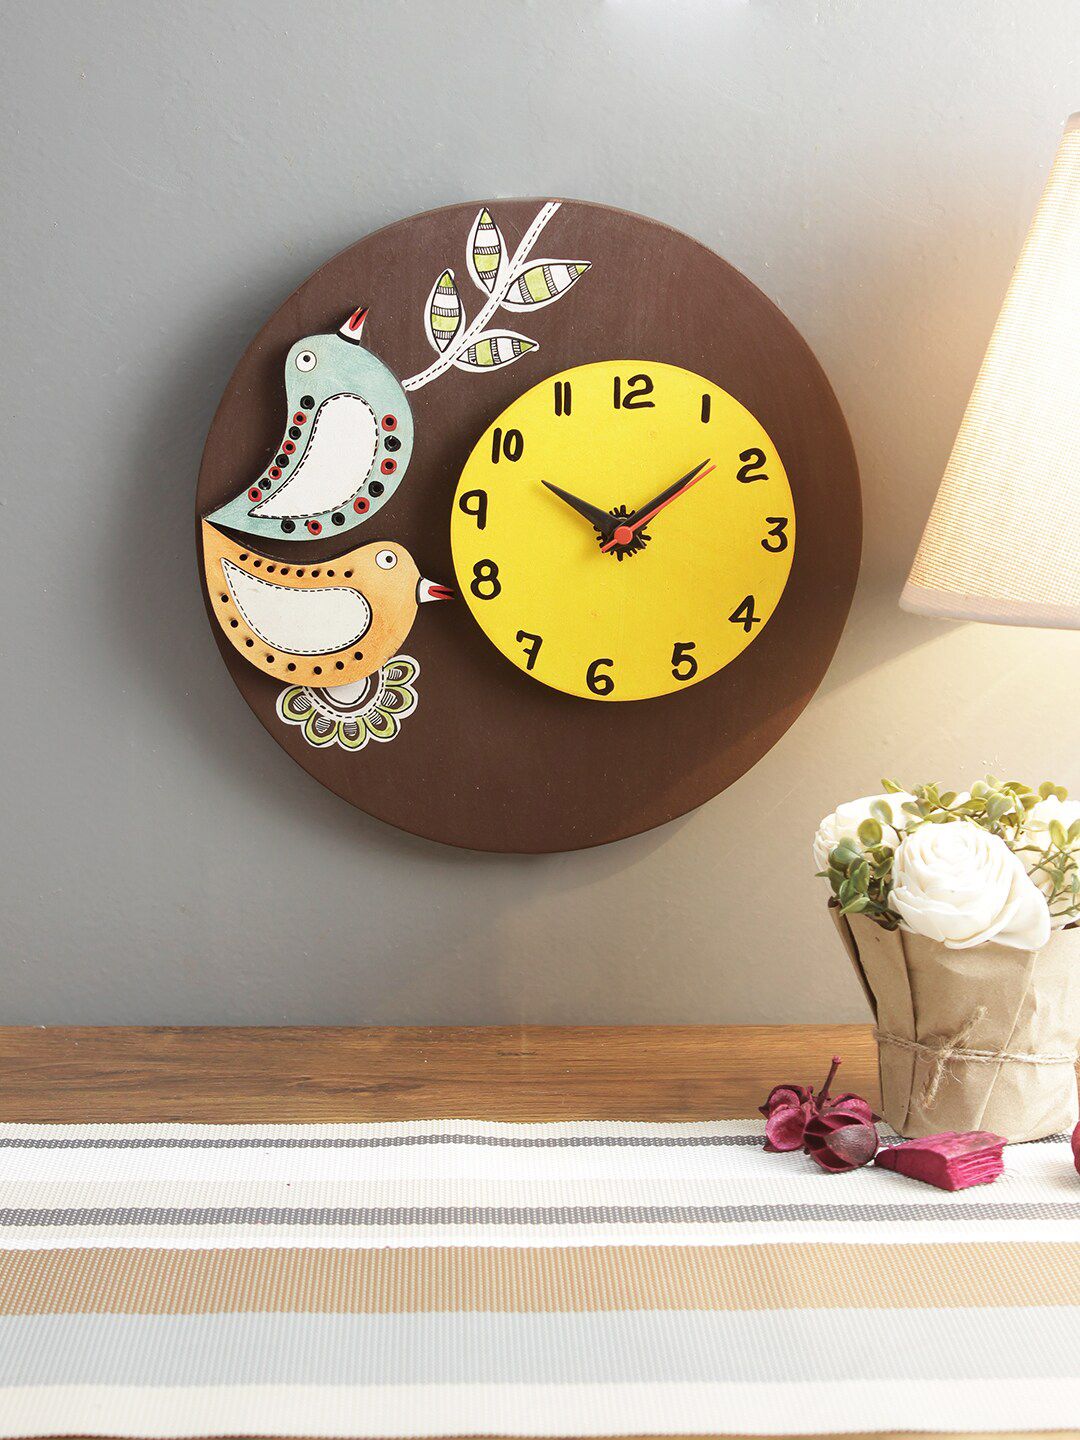 Aapno Rajasthan Brown & Yellow Printed Handpainted Round Wooden Wall Clock Price in India